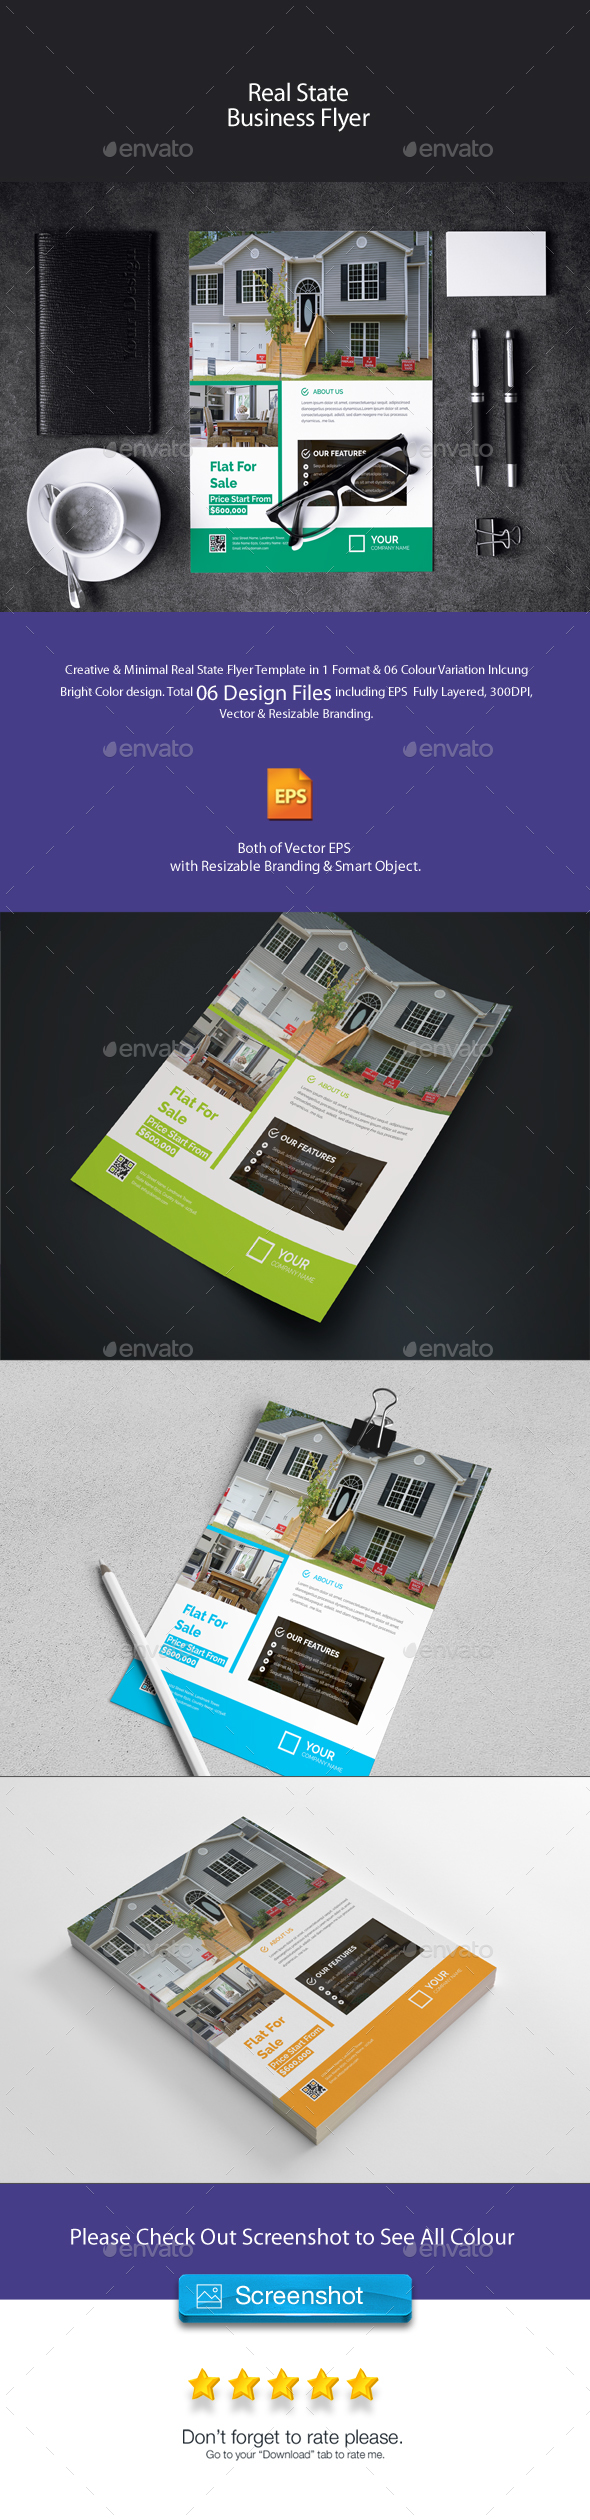 GraphicRiver Real State Flyer 20875569